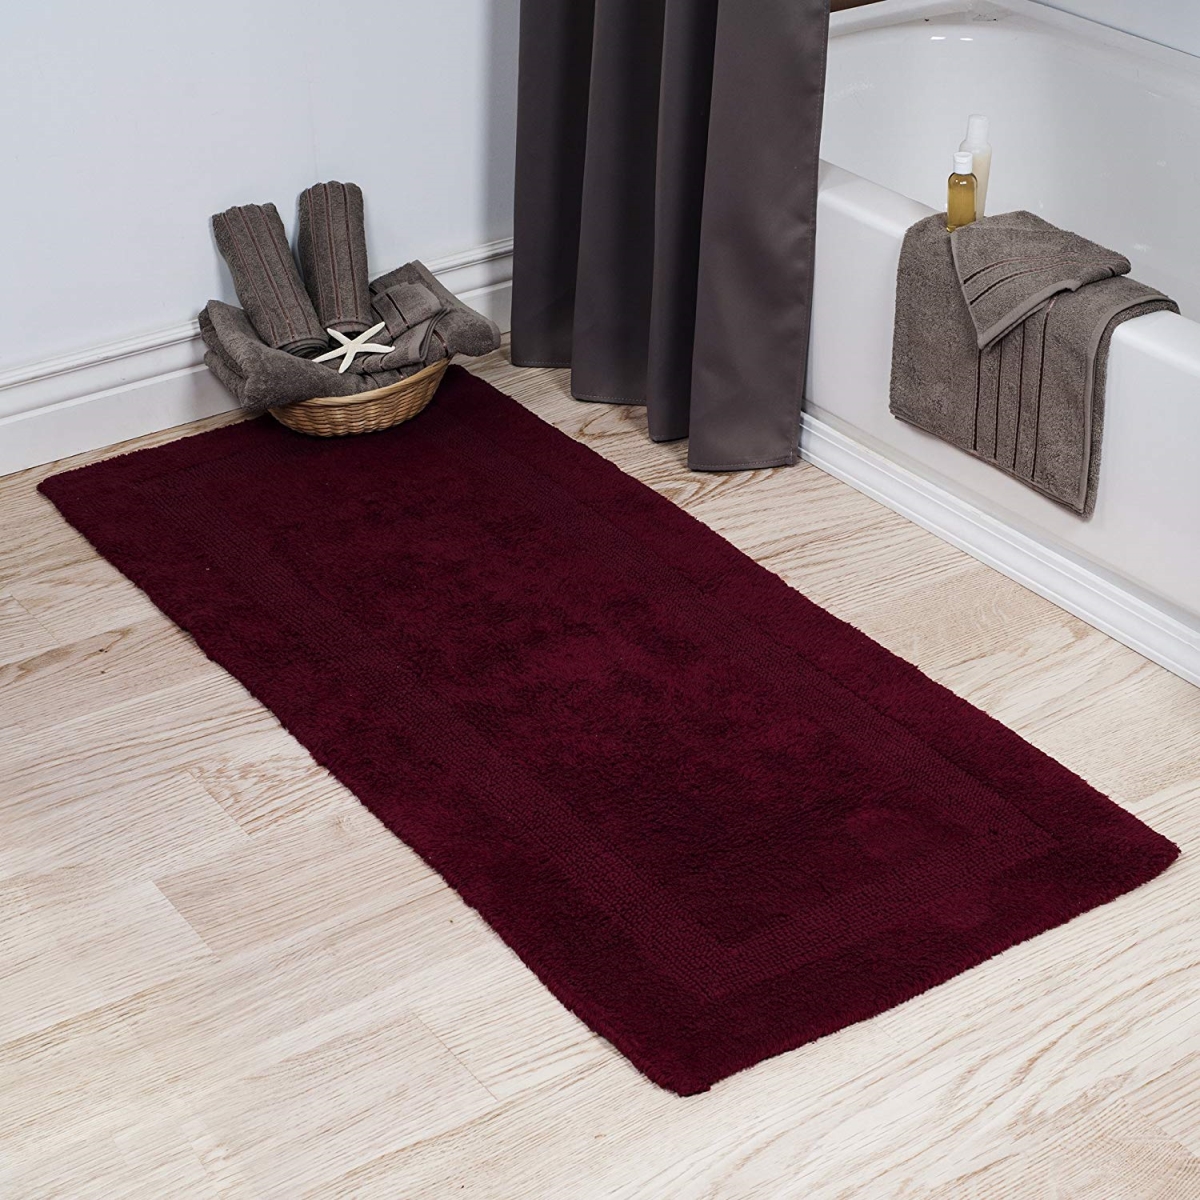 Picture of Bedford Home 67A-01608 100 Percent Cotton Reversible Long Bath Rug - Burgundy - 24 x 60 in.